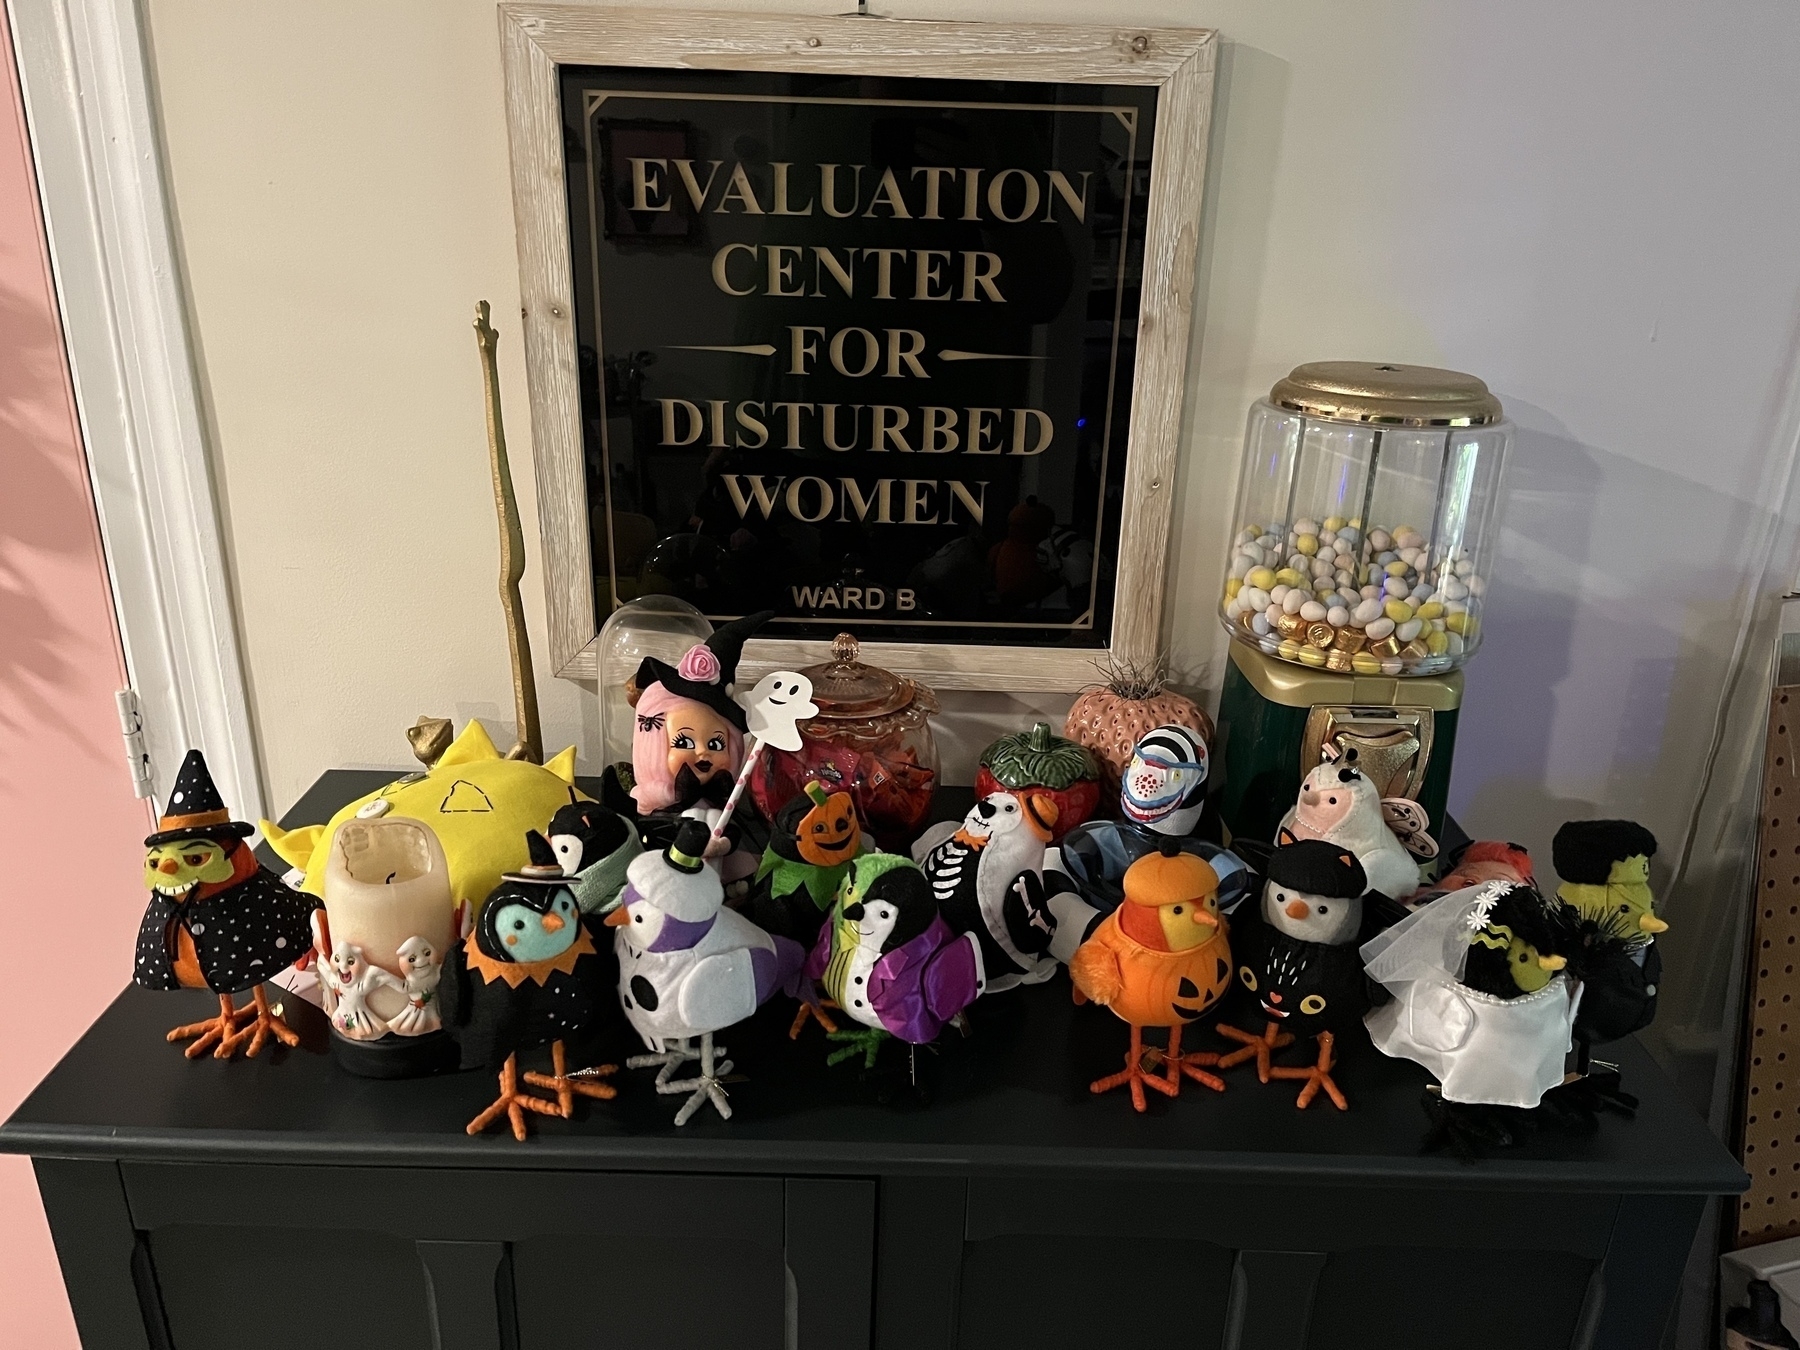 A group of about 20 different fabric birds standing about 6 1/2 inches tall wearing various Halloween costumes in front of a sign saying Evaluation Center for Disturbed Women. 